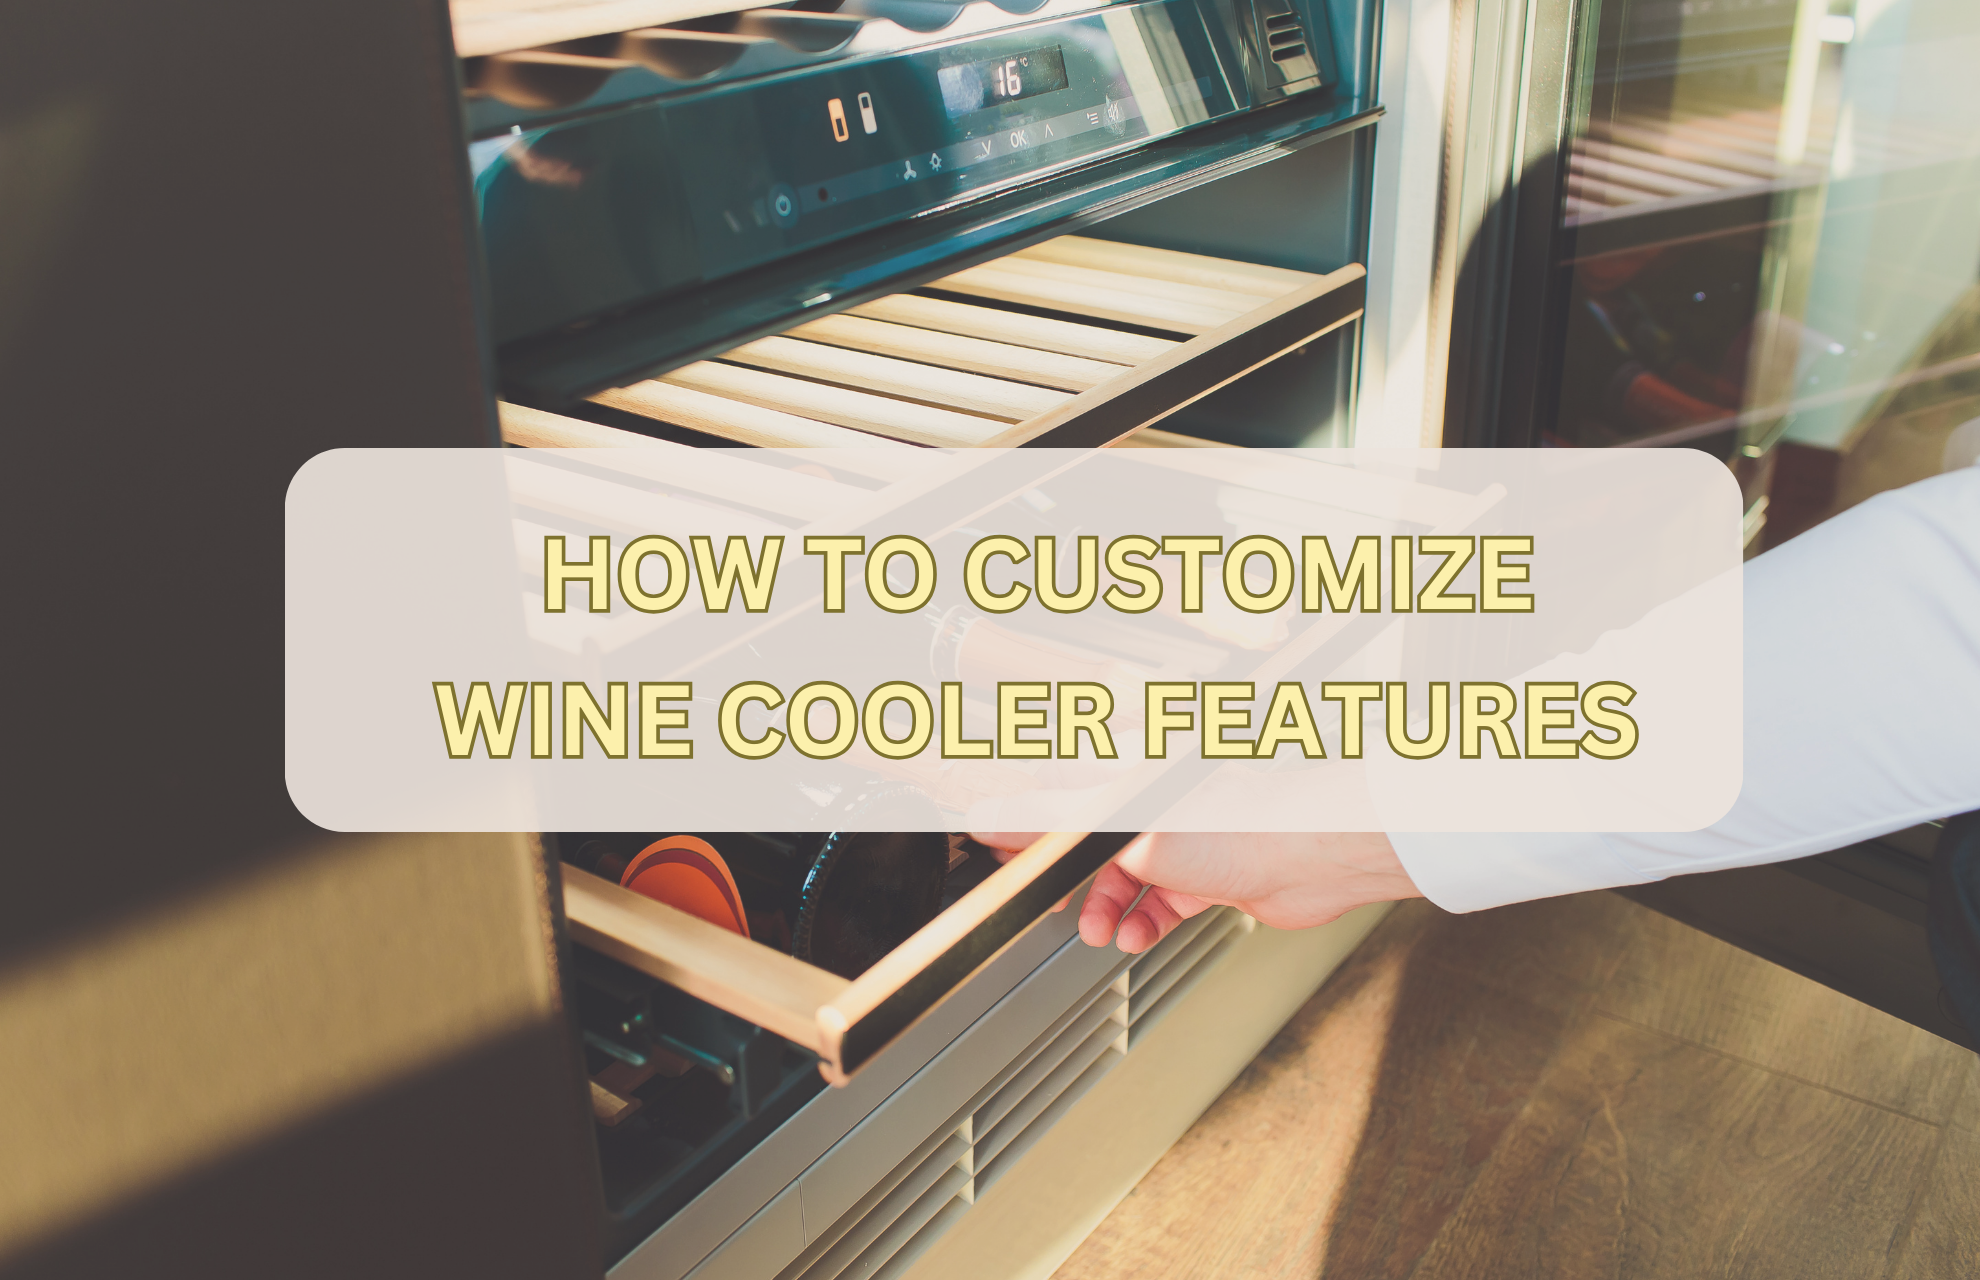 HOW TO CUSTOMIZE WINE COOLER FEATURES